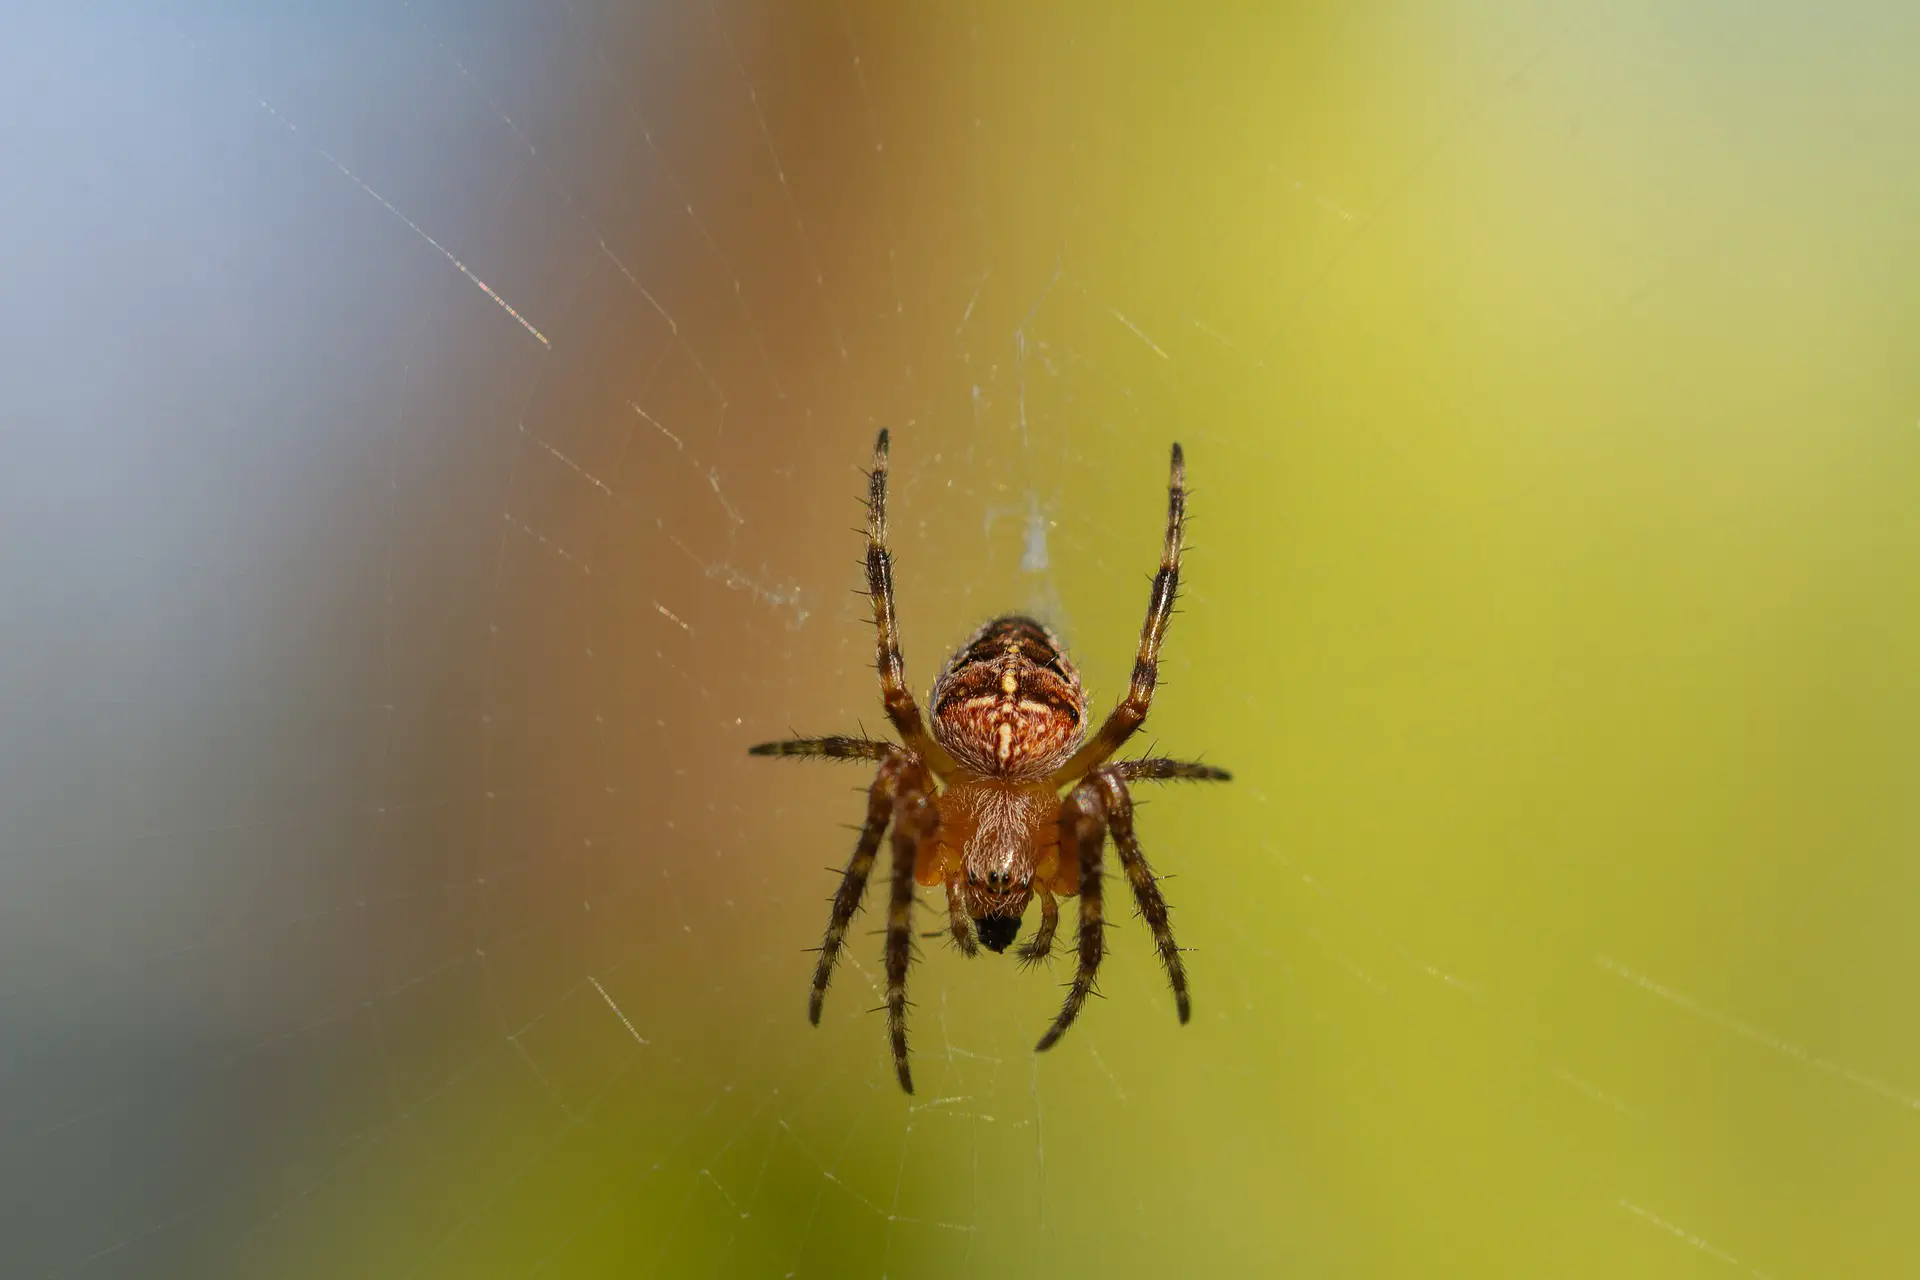 How Long Does It Take For Vinegar To Kill Spiders?